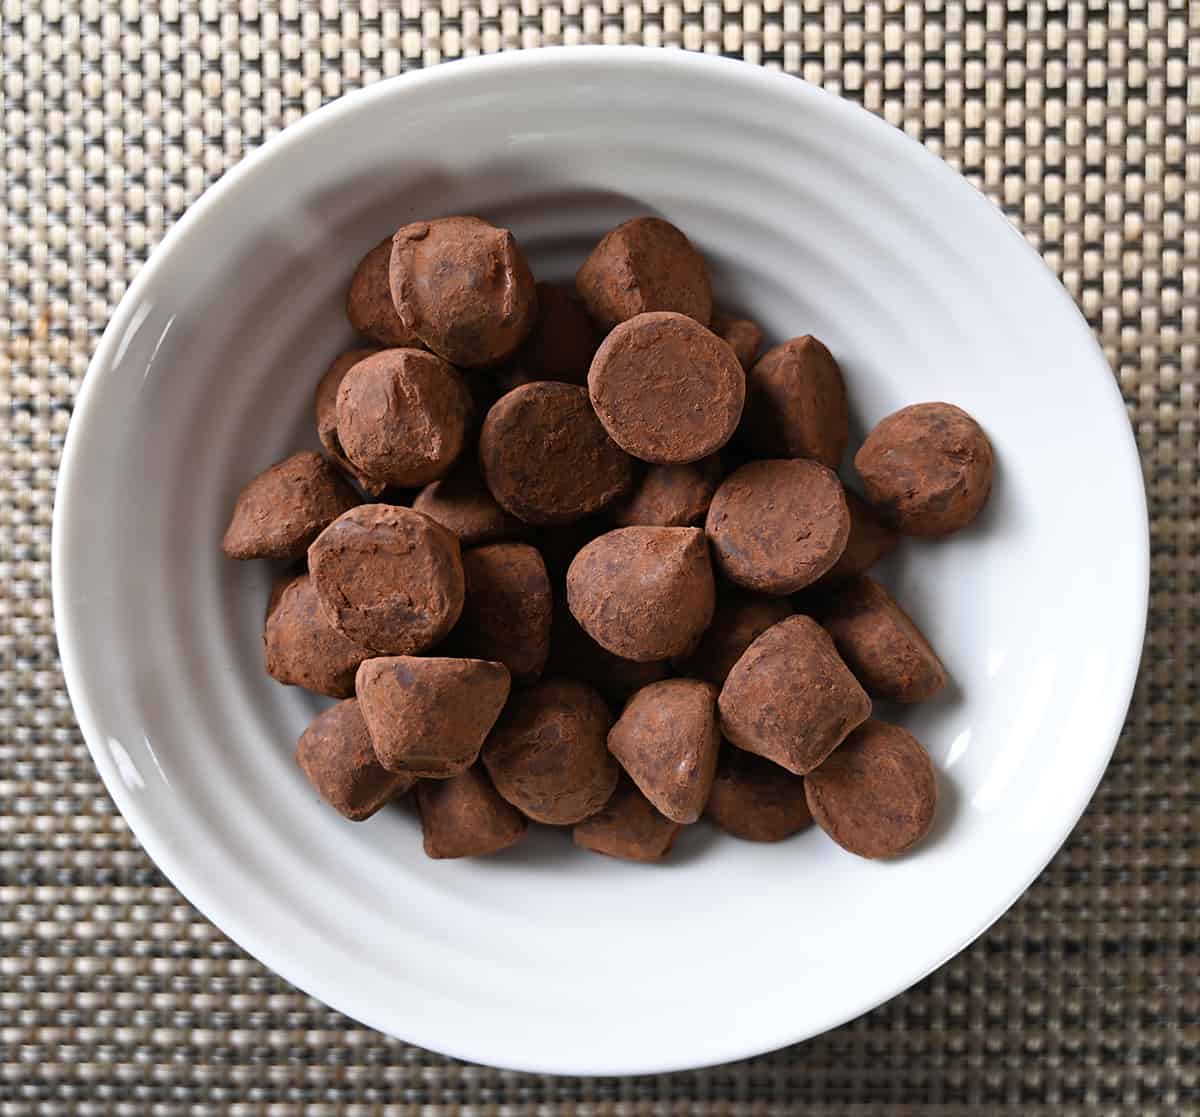 Top down image of a bowl of truffles sitting on a table.